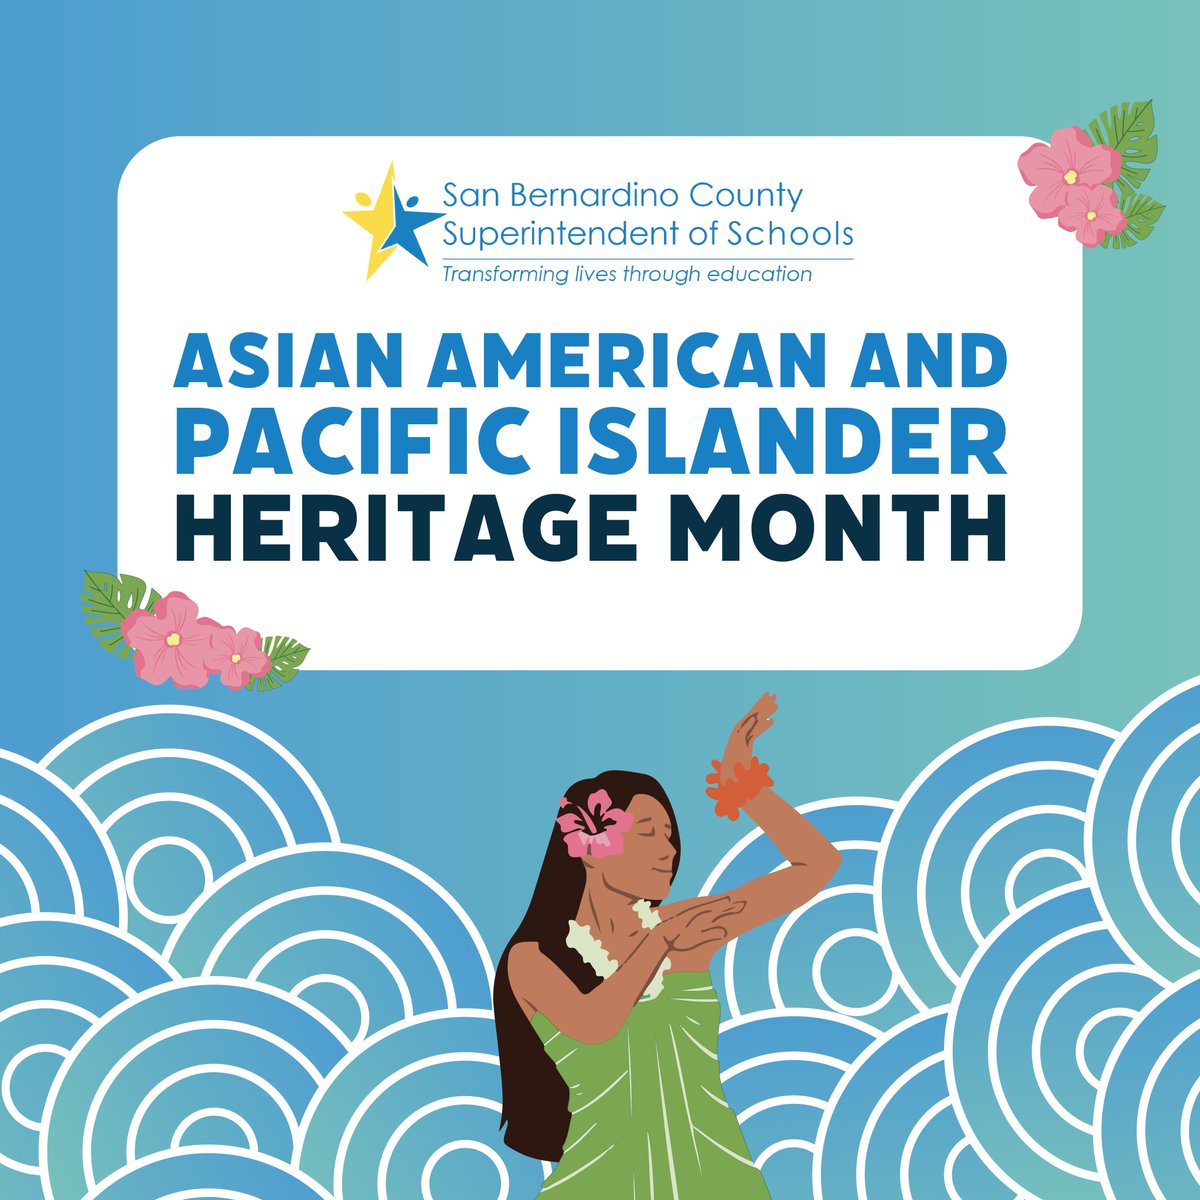 Celebrating the vibrant tapestry of Asian American and Pacific Islander heritage all month long! 🌺 Let's honor the rich cultures, histories and contributions of AAPI communities. #SBCountySchools #TransformingLives #AAPIHeritageMonth